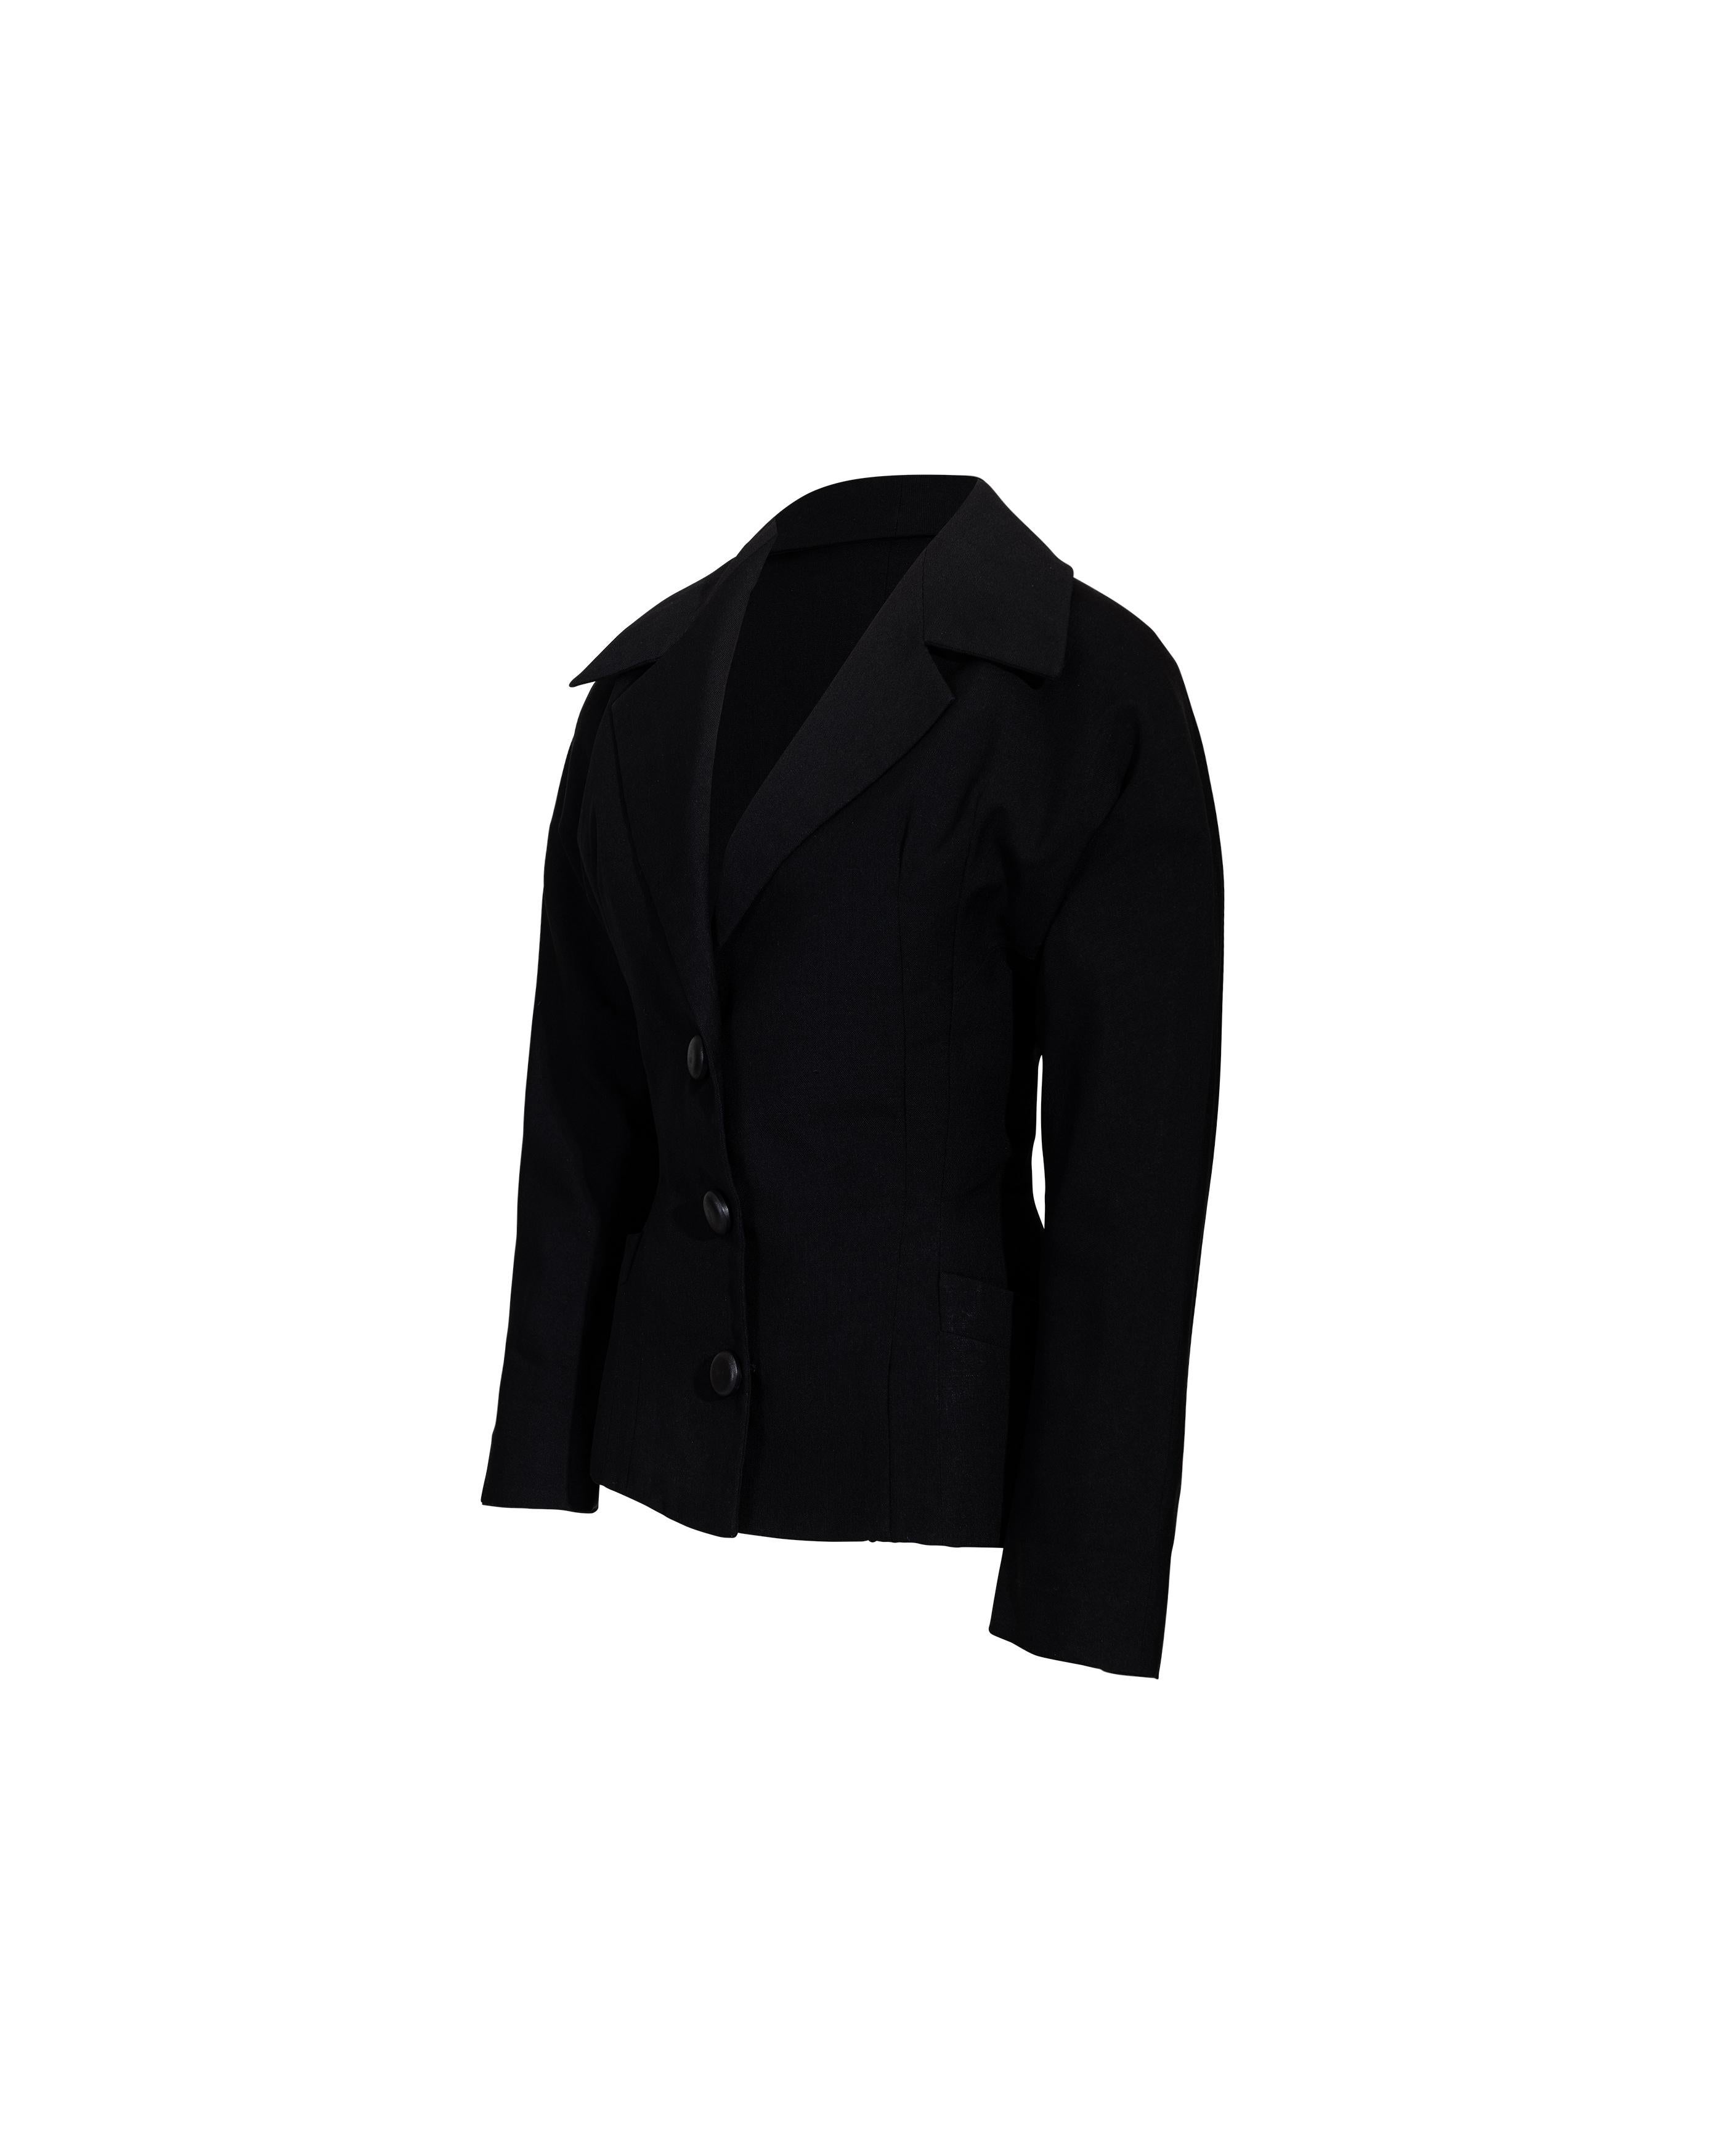 c. 1950 Christian Dior 'New Look' Black Wool Jacket In Good Condition For Sale In North Hollywood, CA